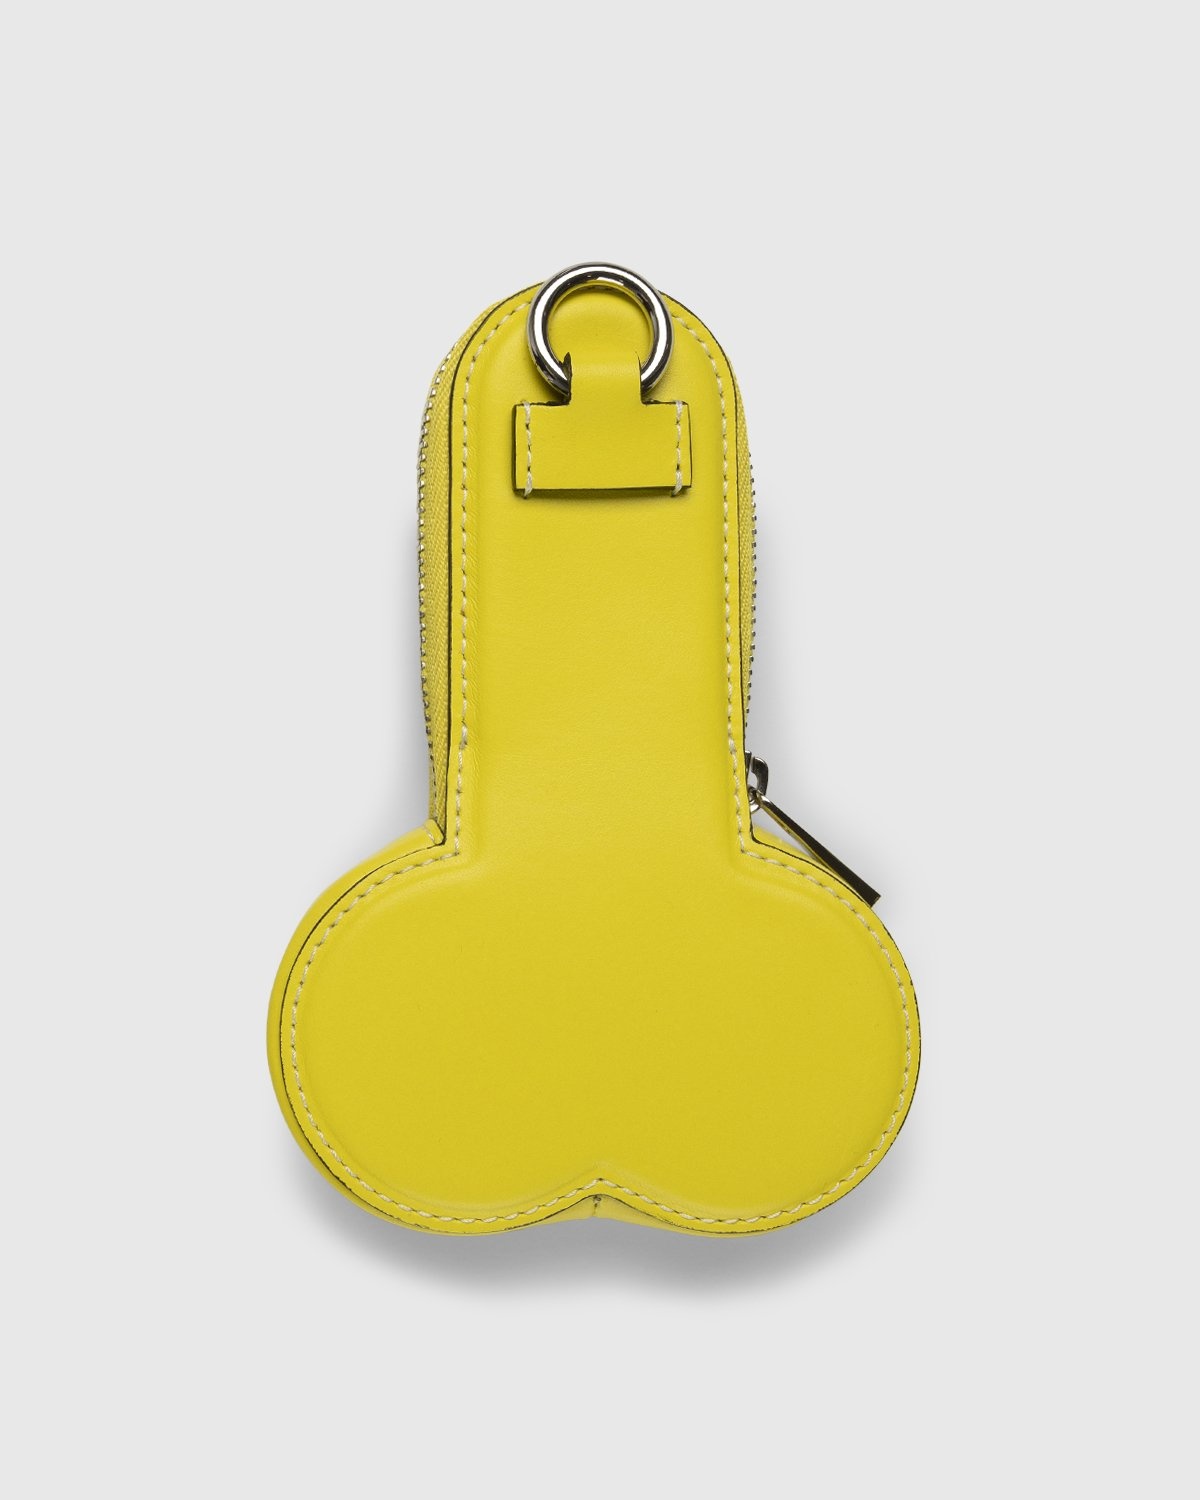 J.W. Anderson – Penis Coin Purse Yellow - Zip Wallets - Yellow - Image 5